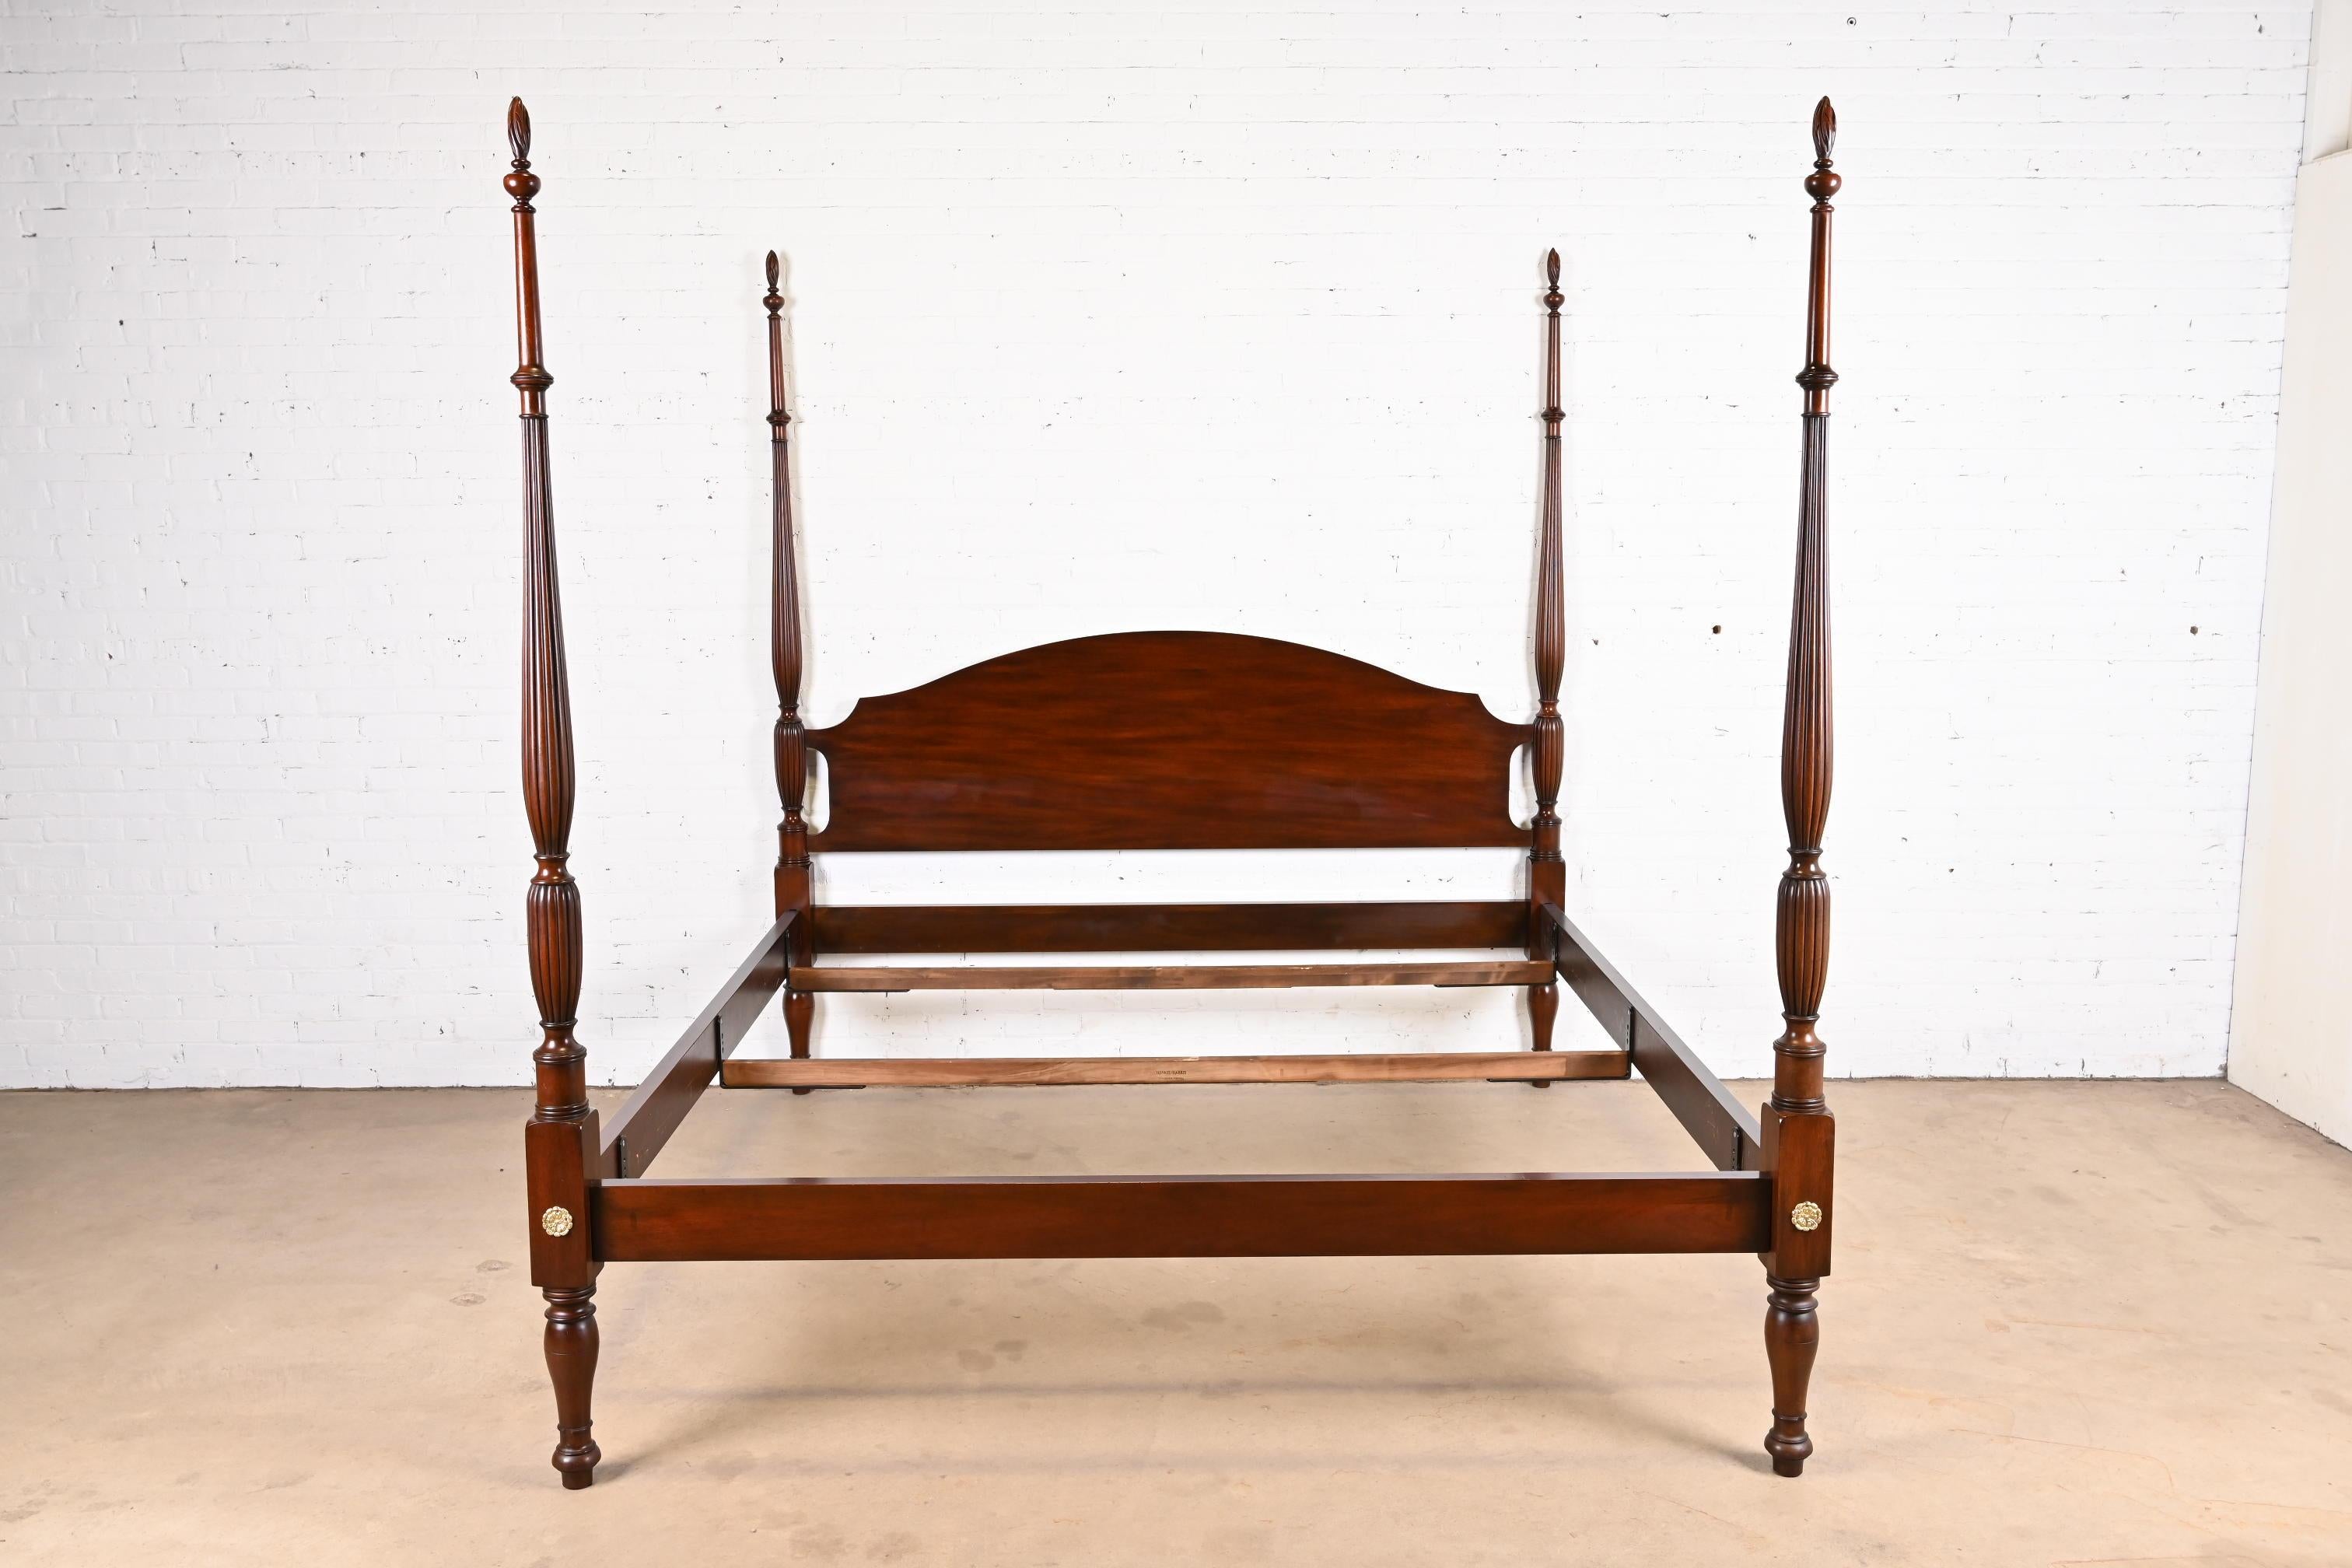 A gorgeous Georgian or Chippendale style four poster king size bed

By Henkel Harris

USA, 1998

Carved solid mahogany, with brass accents.

Measures: 83